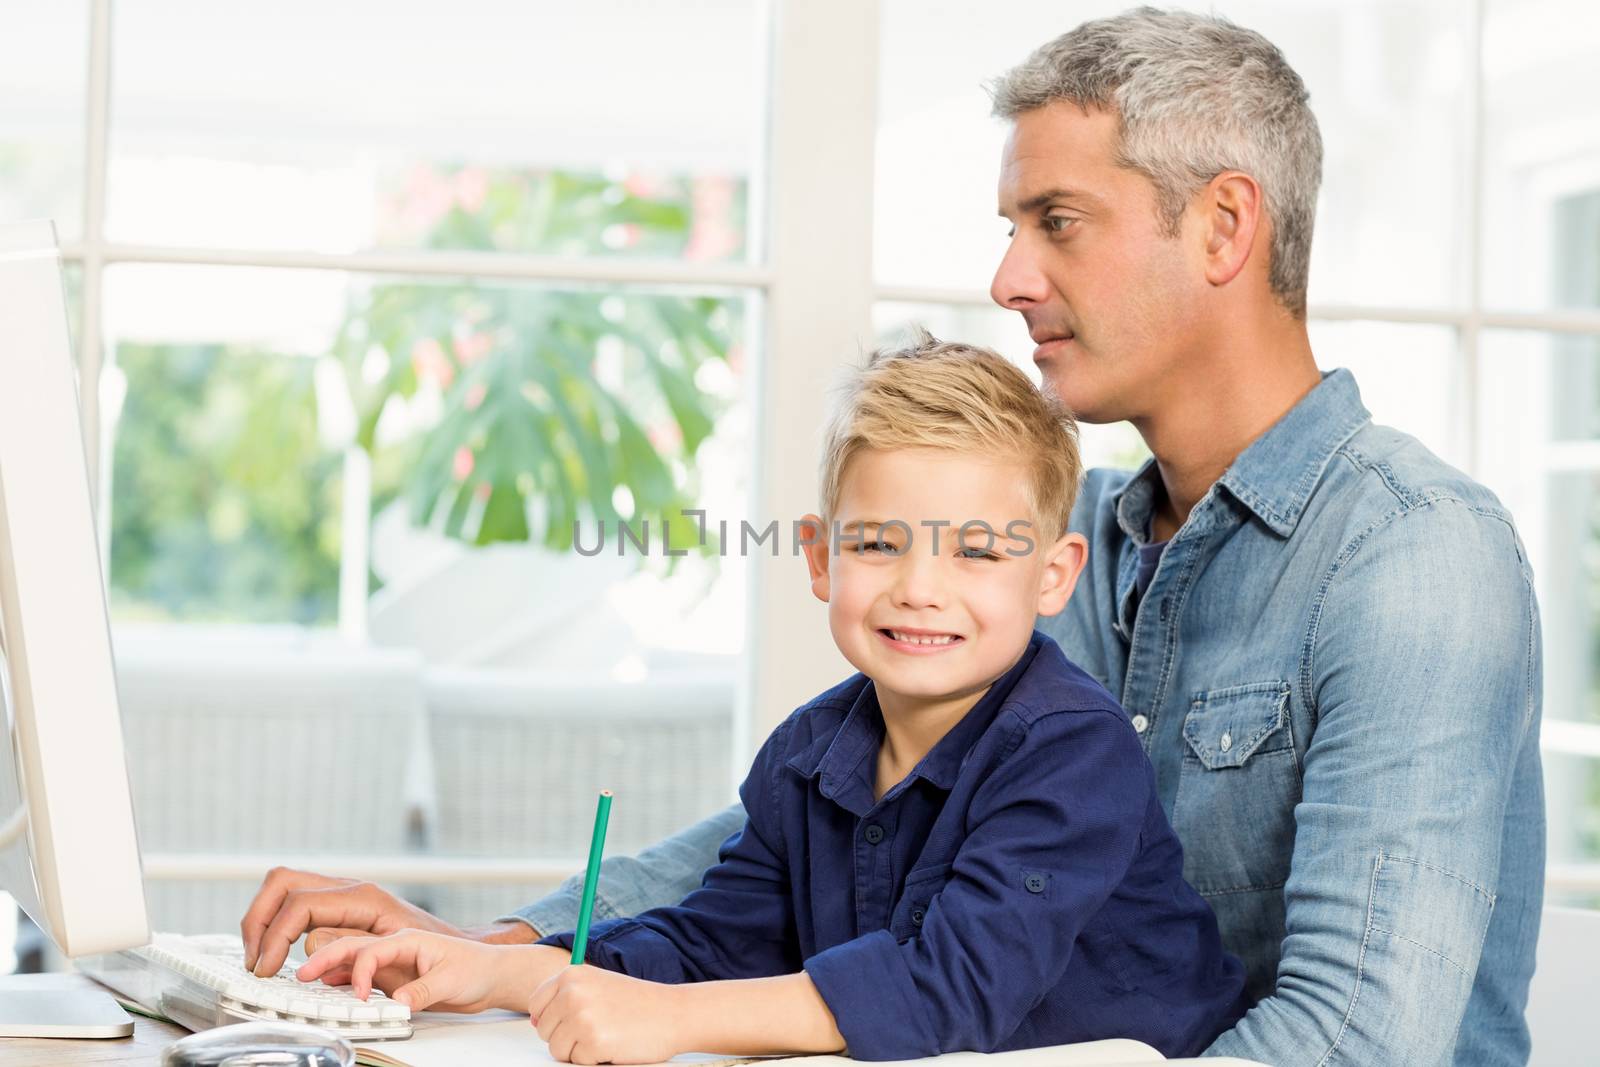 Father and son at the desk using computer and drawing